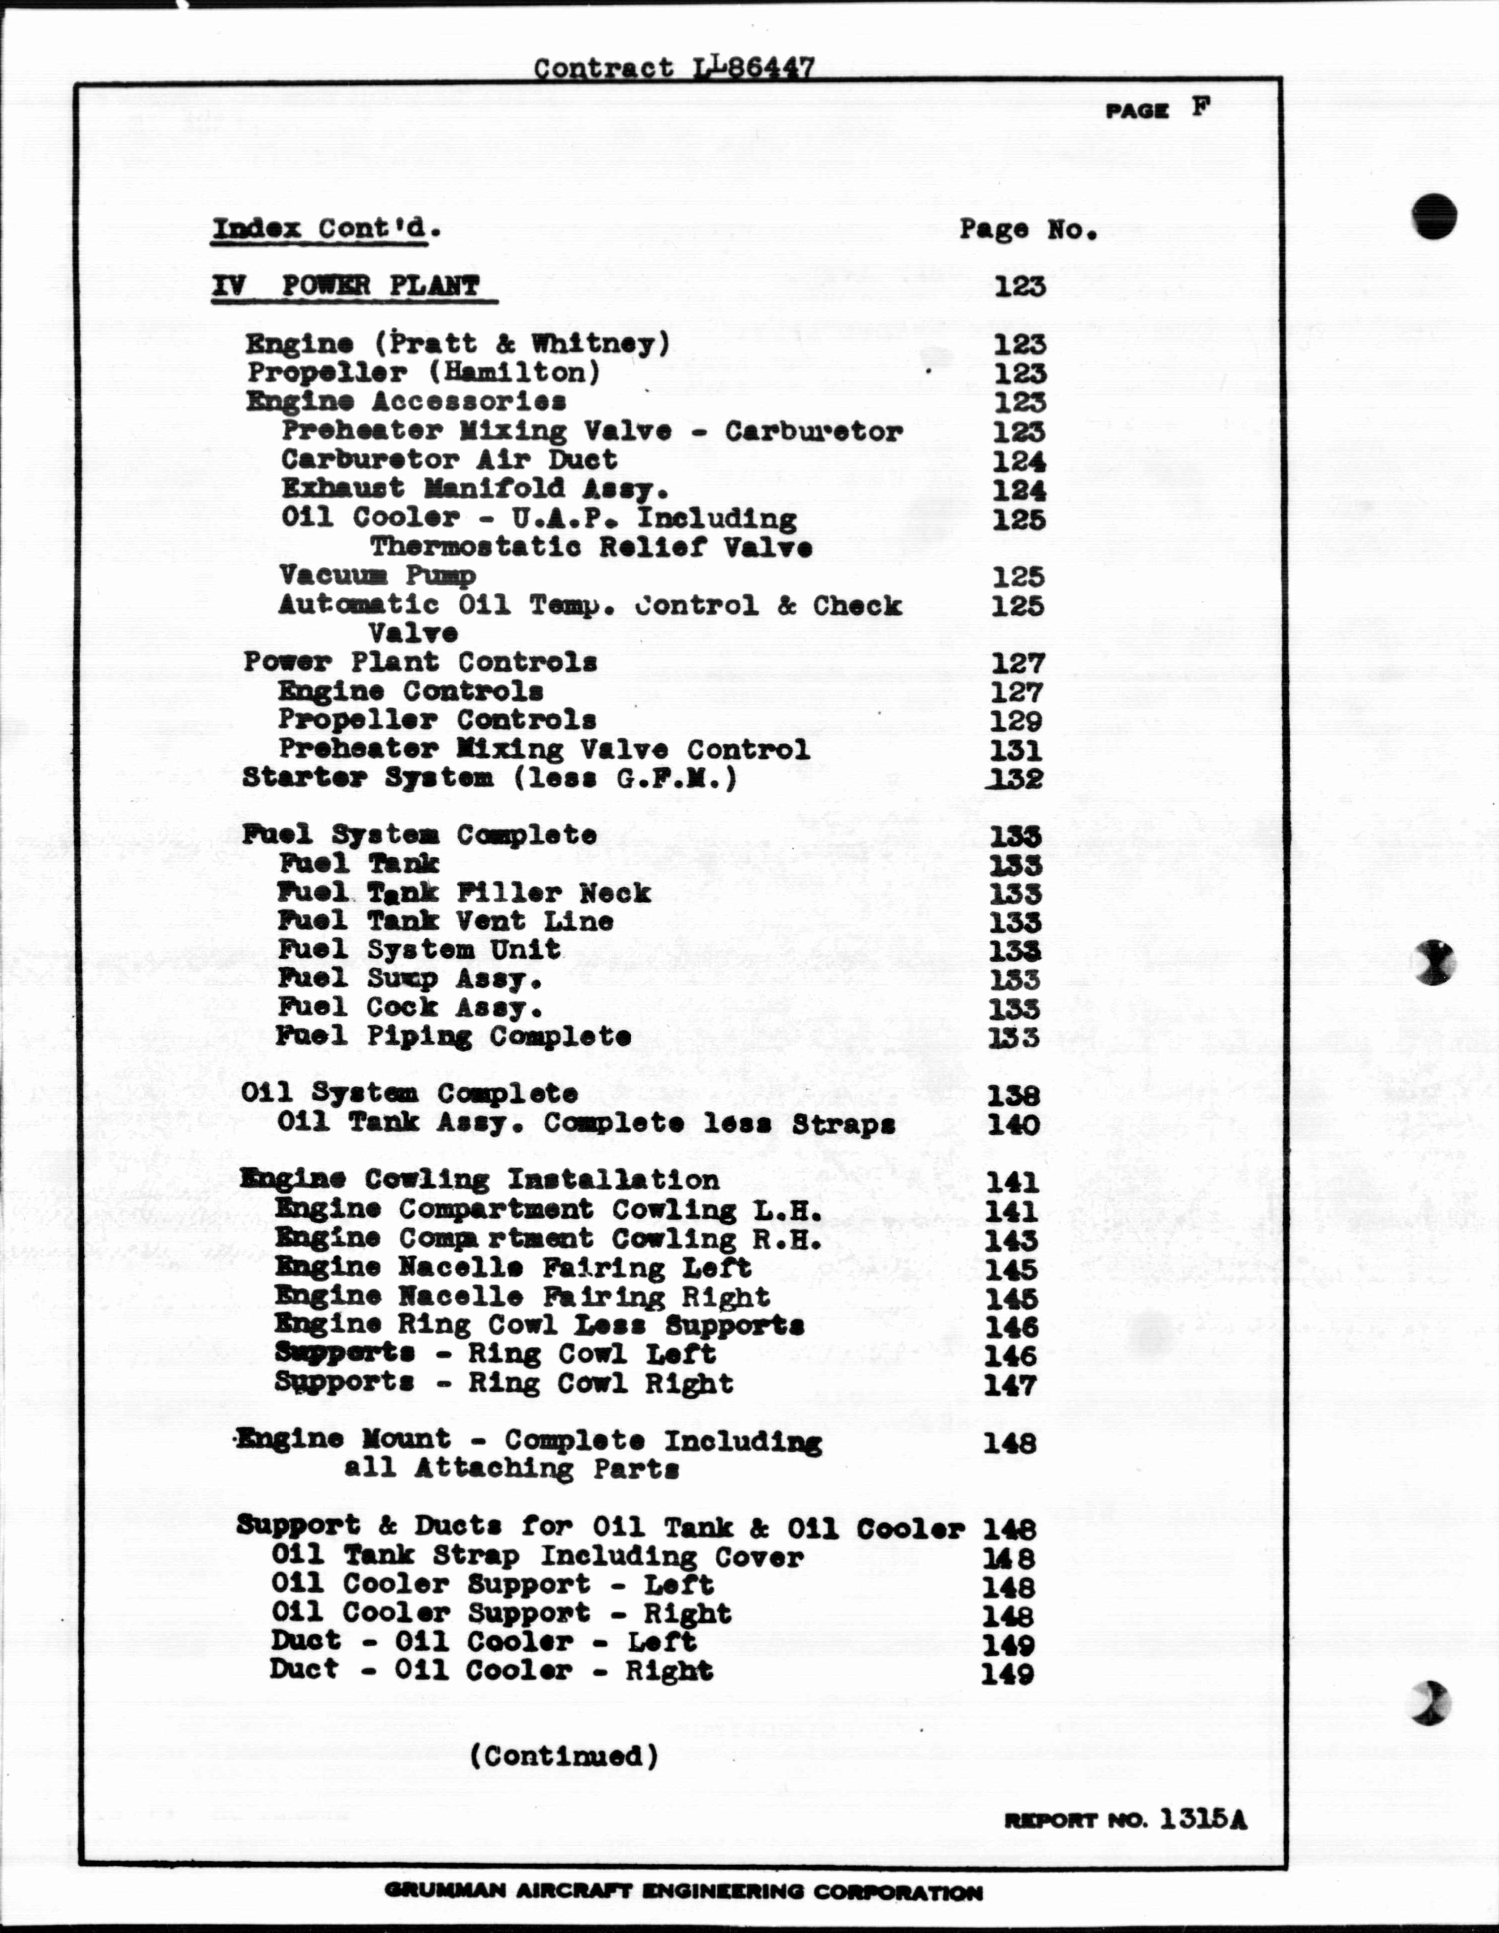 Sample page 6 from AirCorps Library document: JRF-6B Final Spare Parts List with Prices, Contract LL86-447 